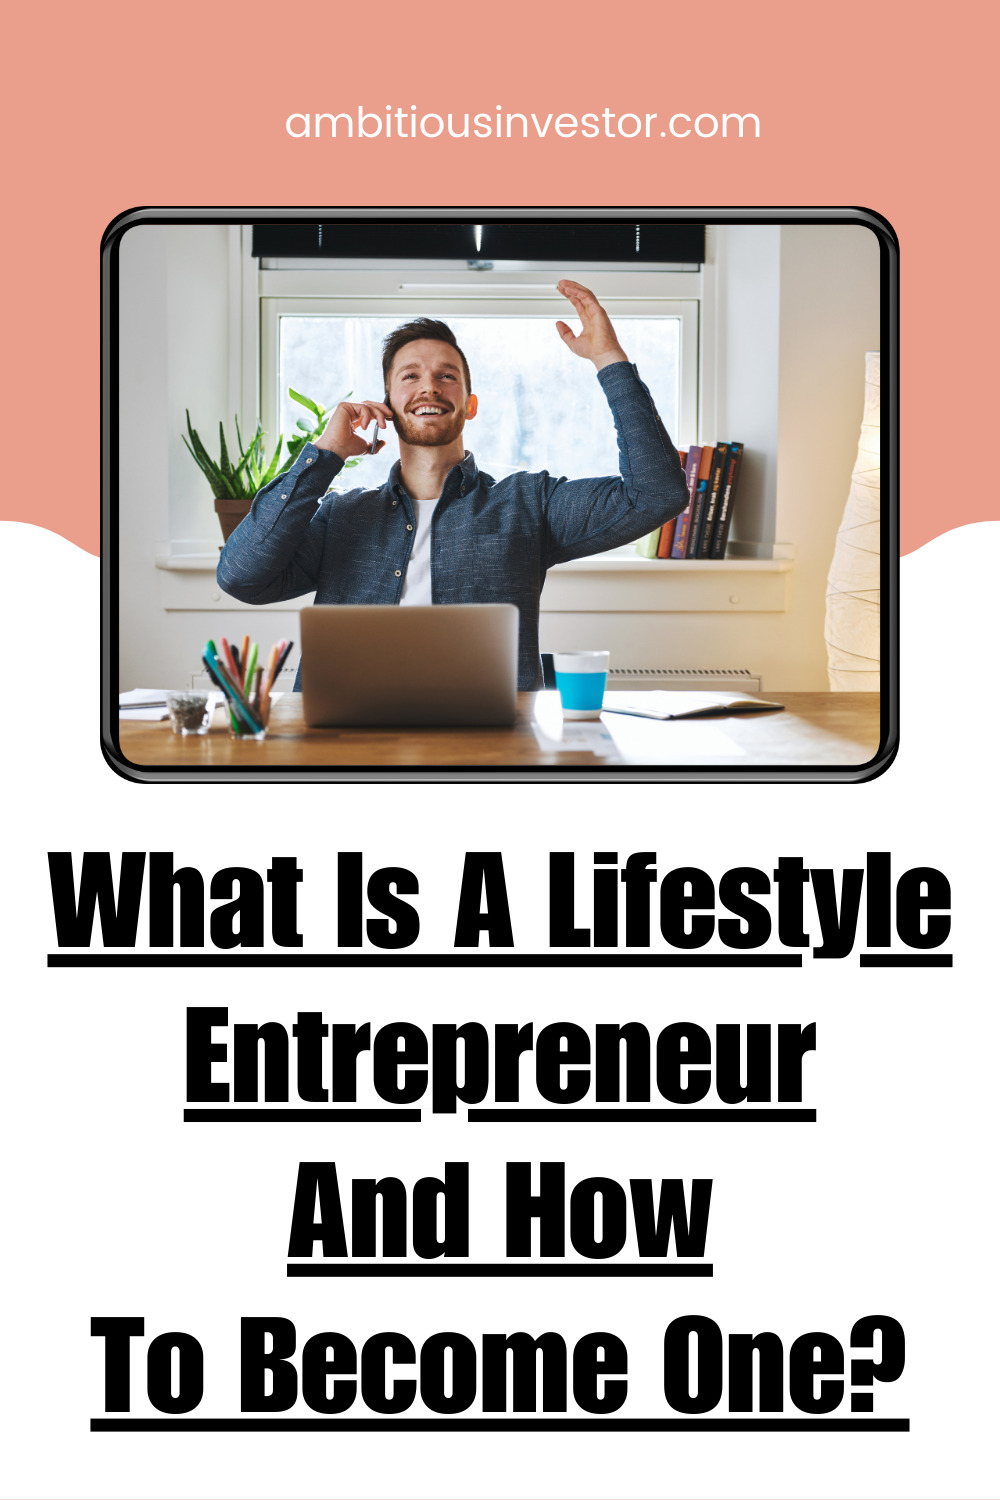 What is a Lifestyle Entrepreneur And How to Become One?